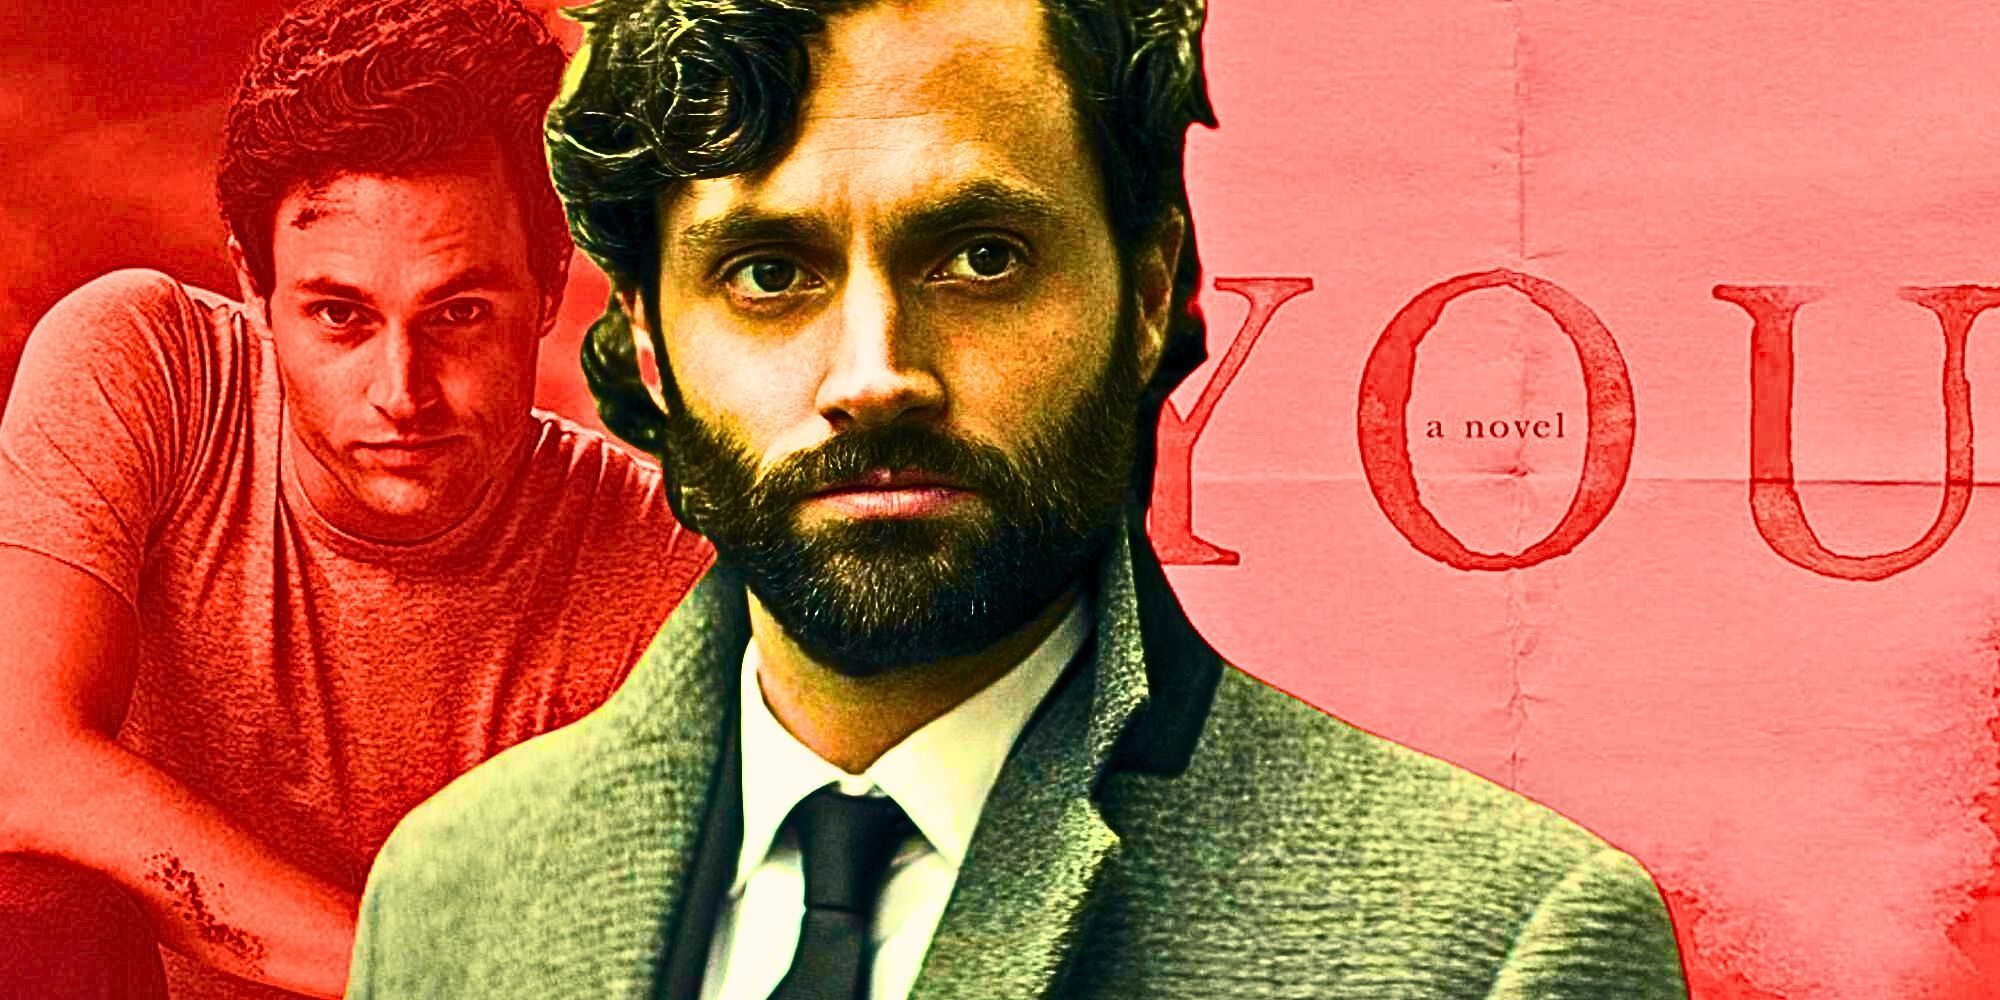 A custom image of Penn Badgley as Joe Goldberg against a blended backdrop of a You poster and the You novel's front cover